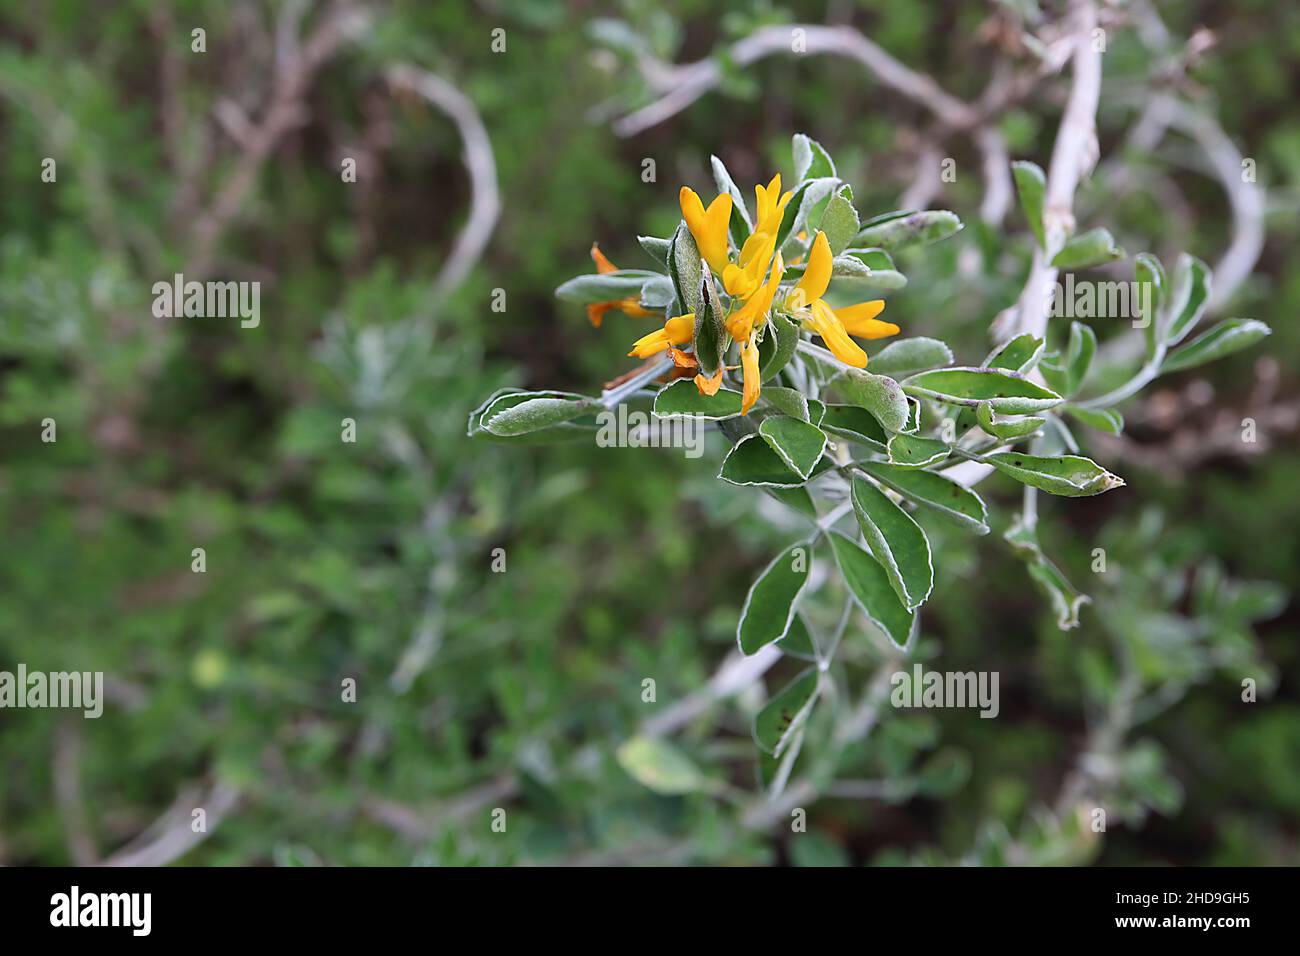 Medicago arborea moon trefoil – yellow pea-shaped flowers and mid green leaves with grey green underside,  December, England, UK Stock Photo